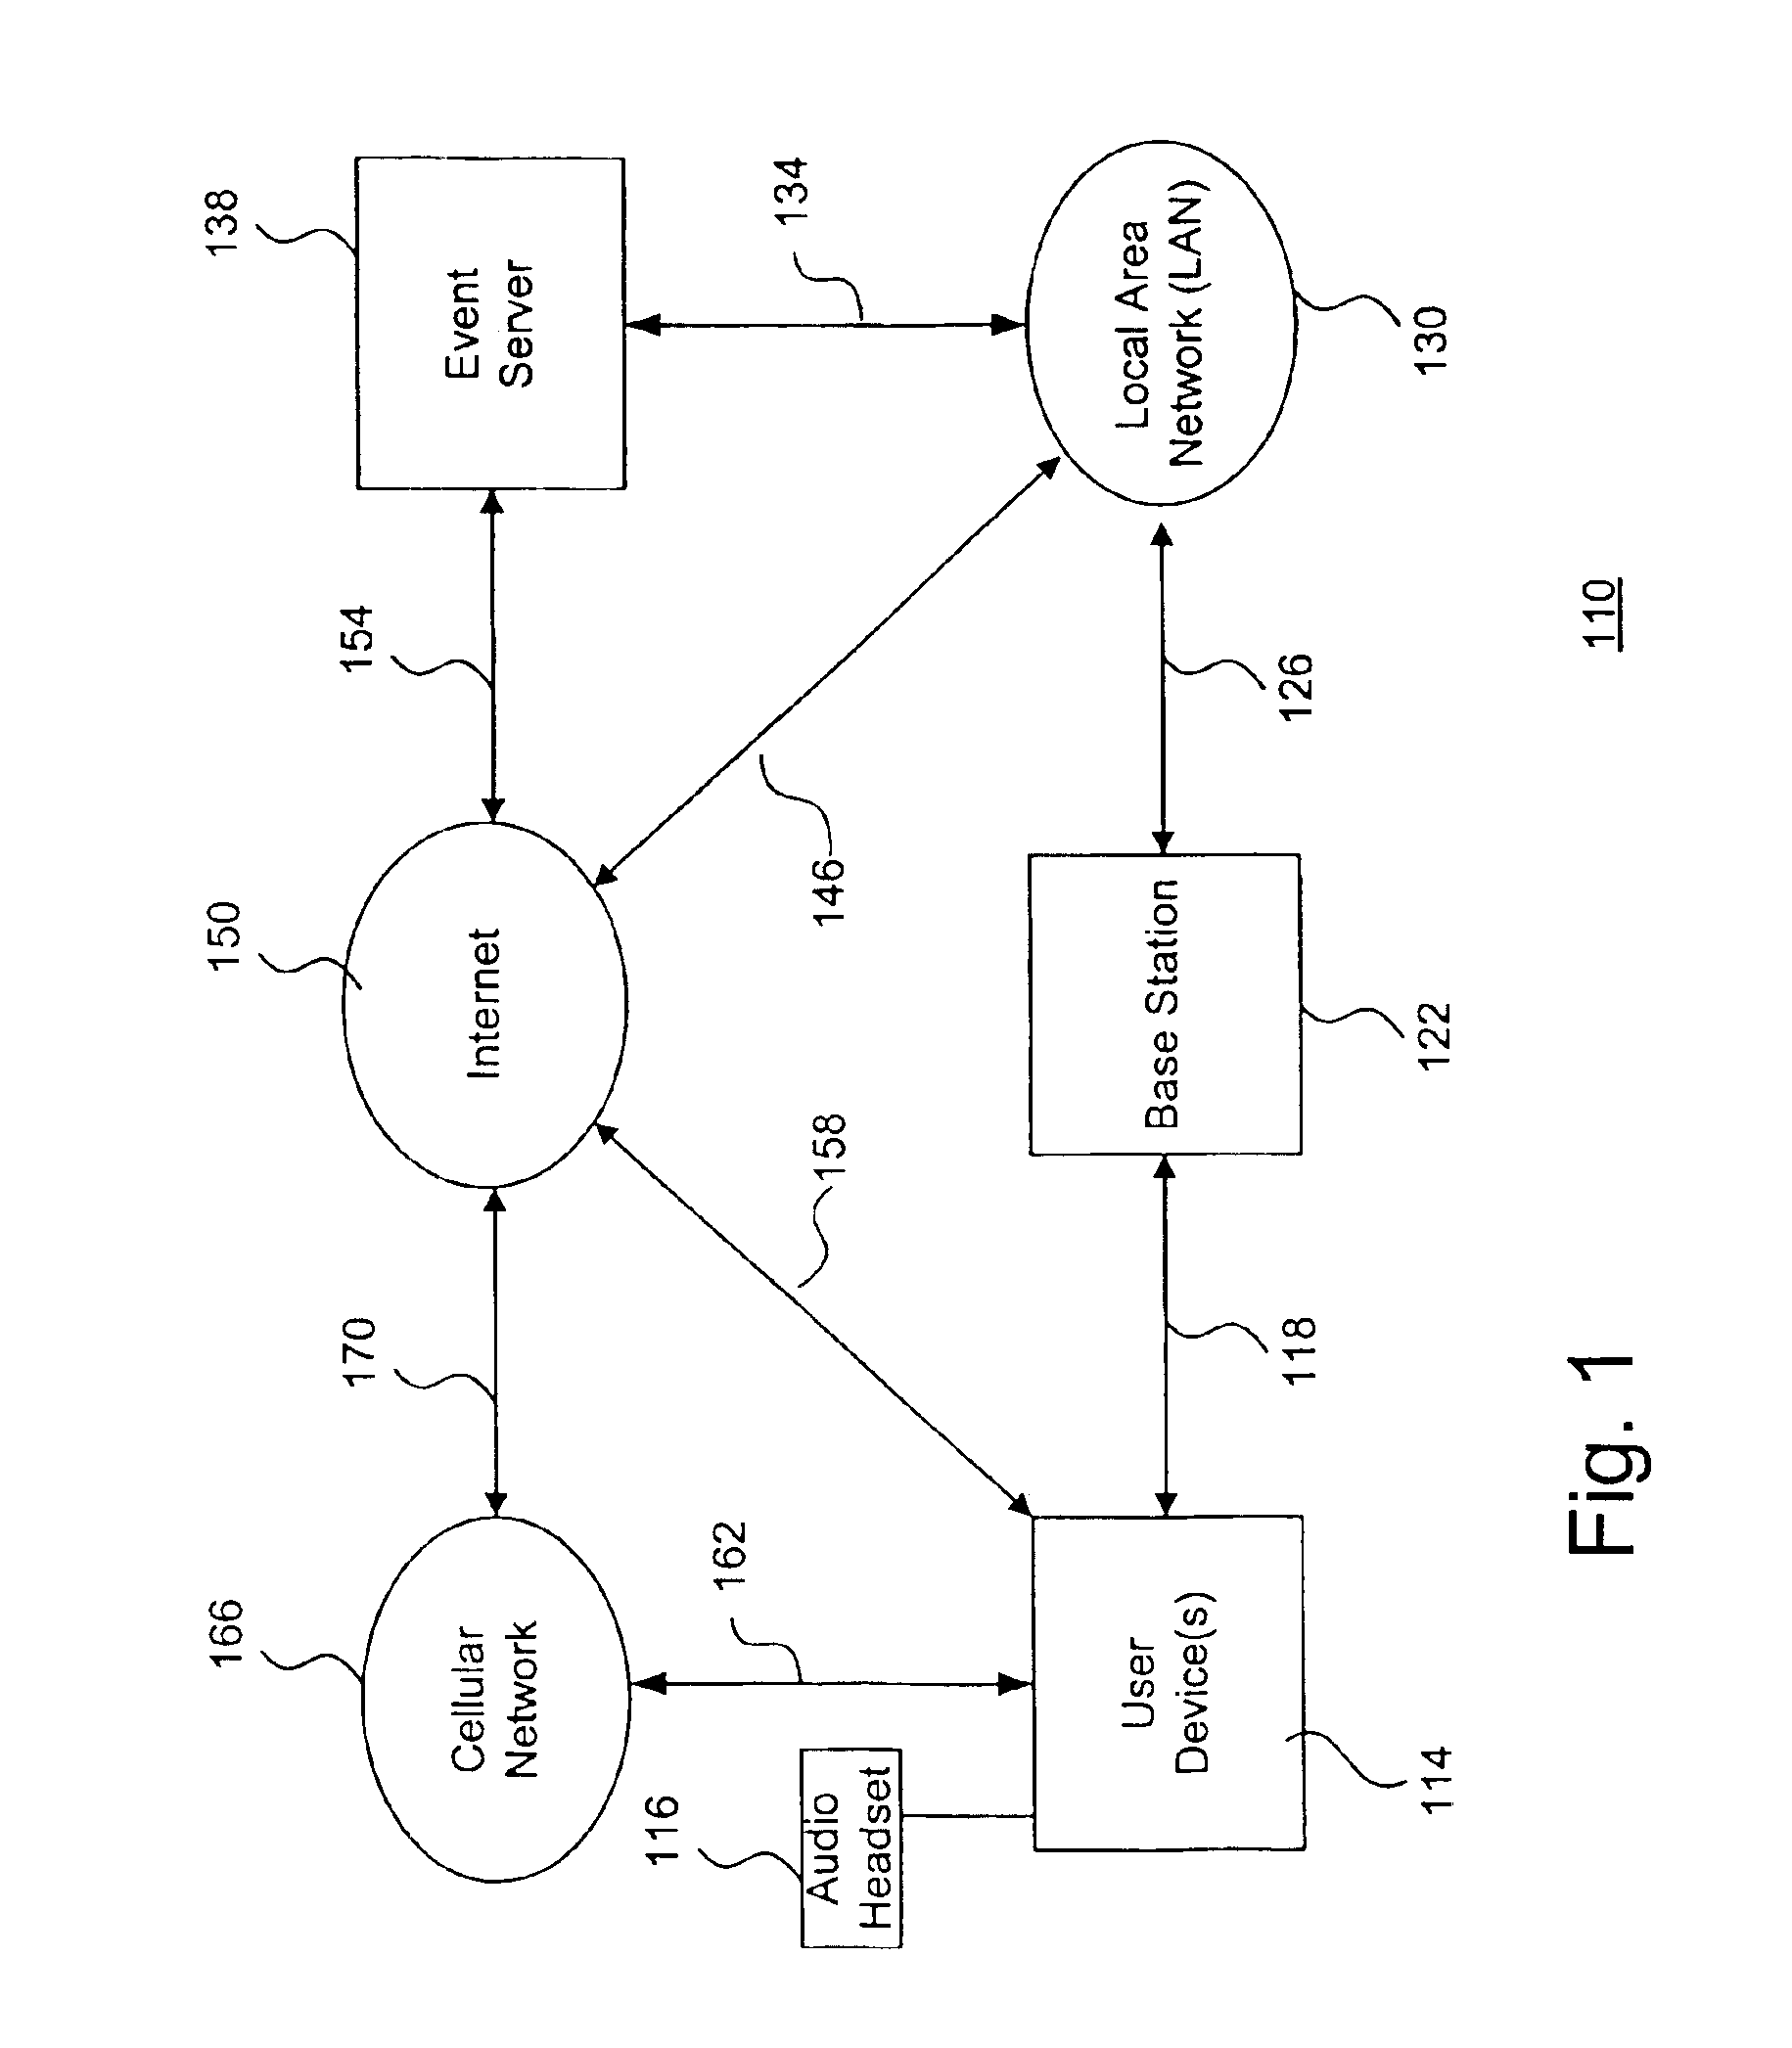 System and method to support gaming in an electronic network